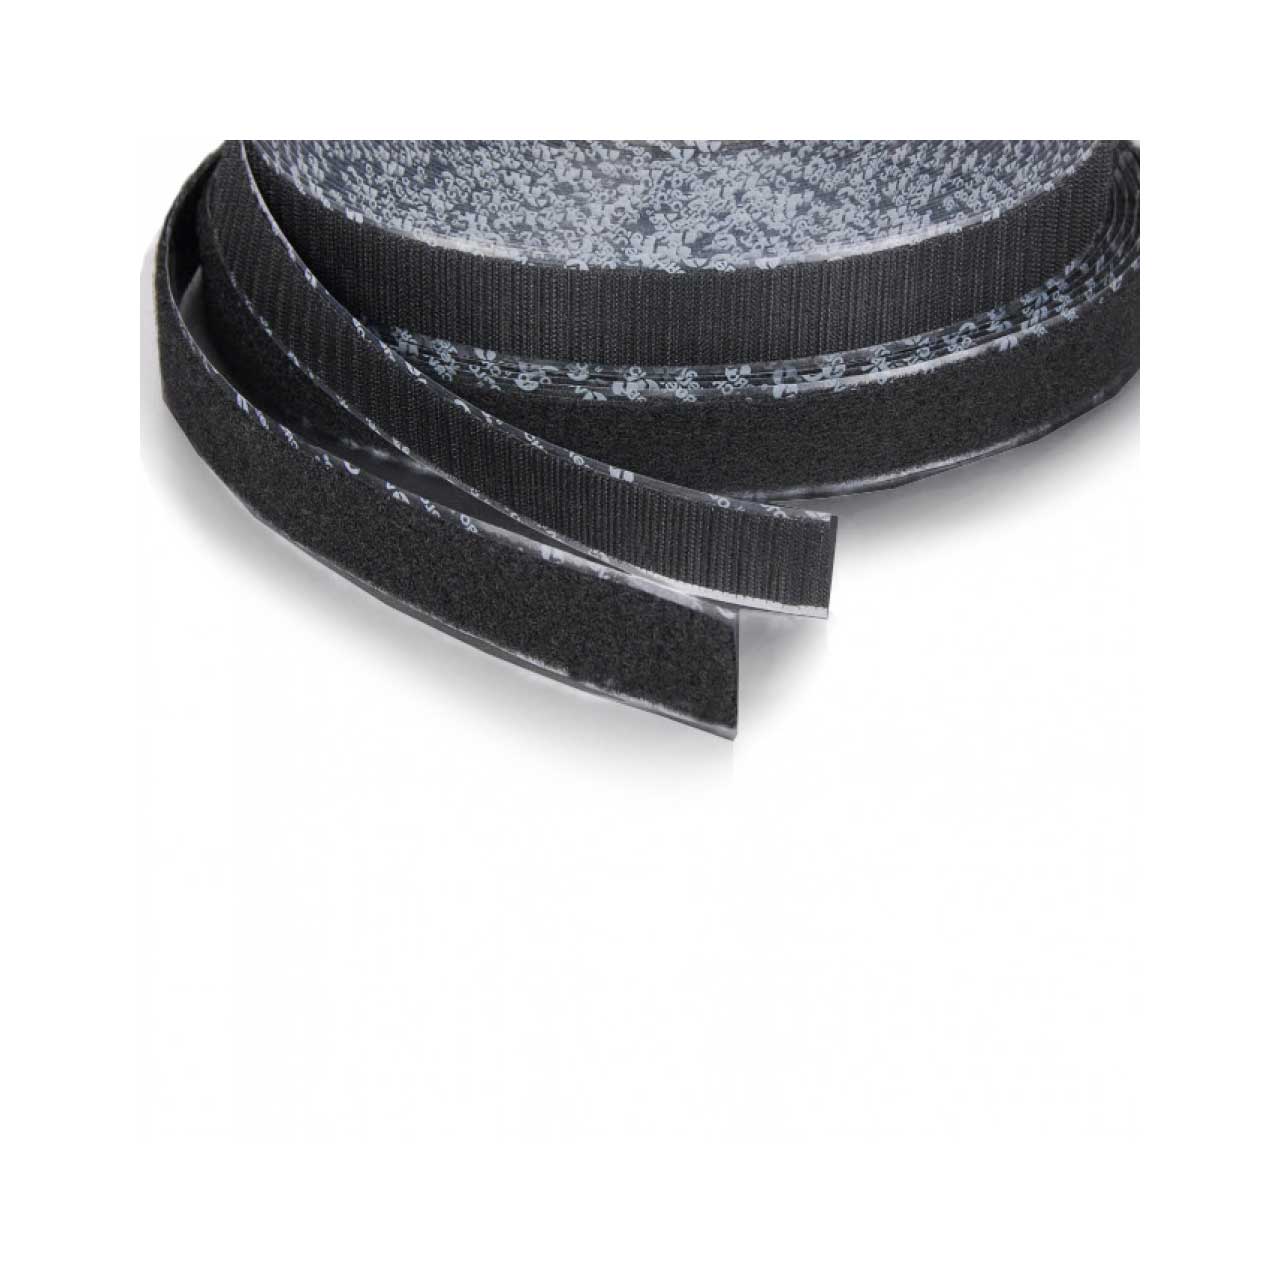  Velcro Sticky Back 3/4-Inch by 25-Yard Loop Tape, Black :  Velcro Roll : Office Products